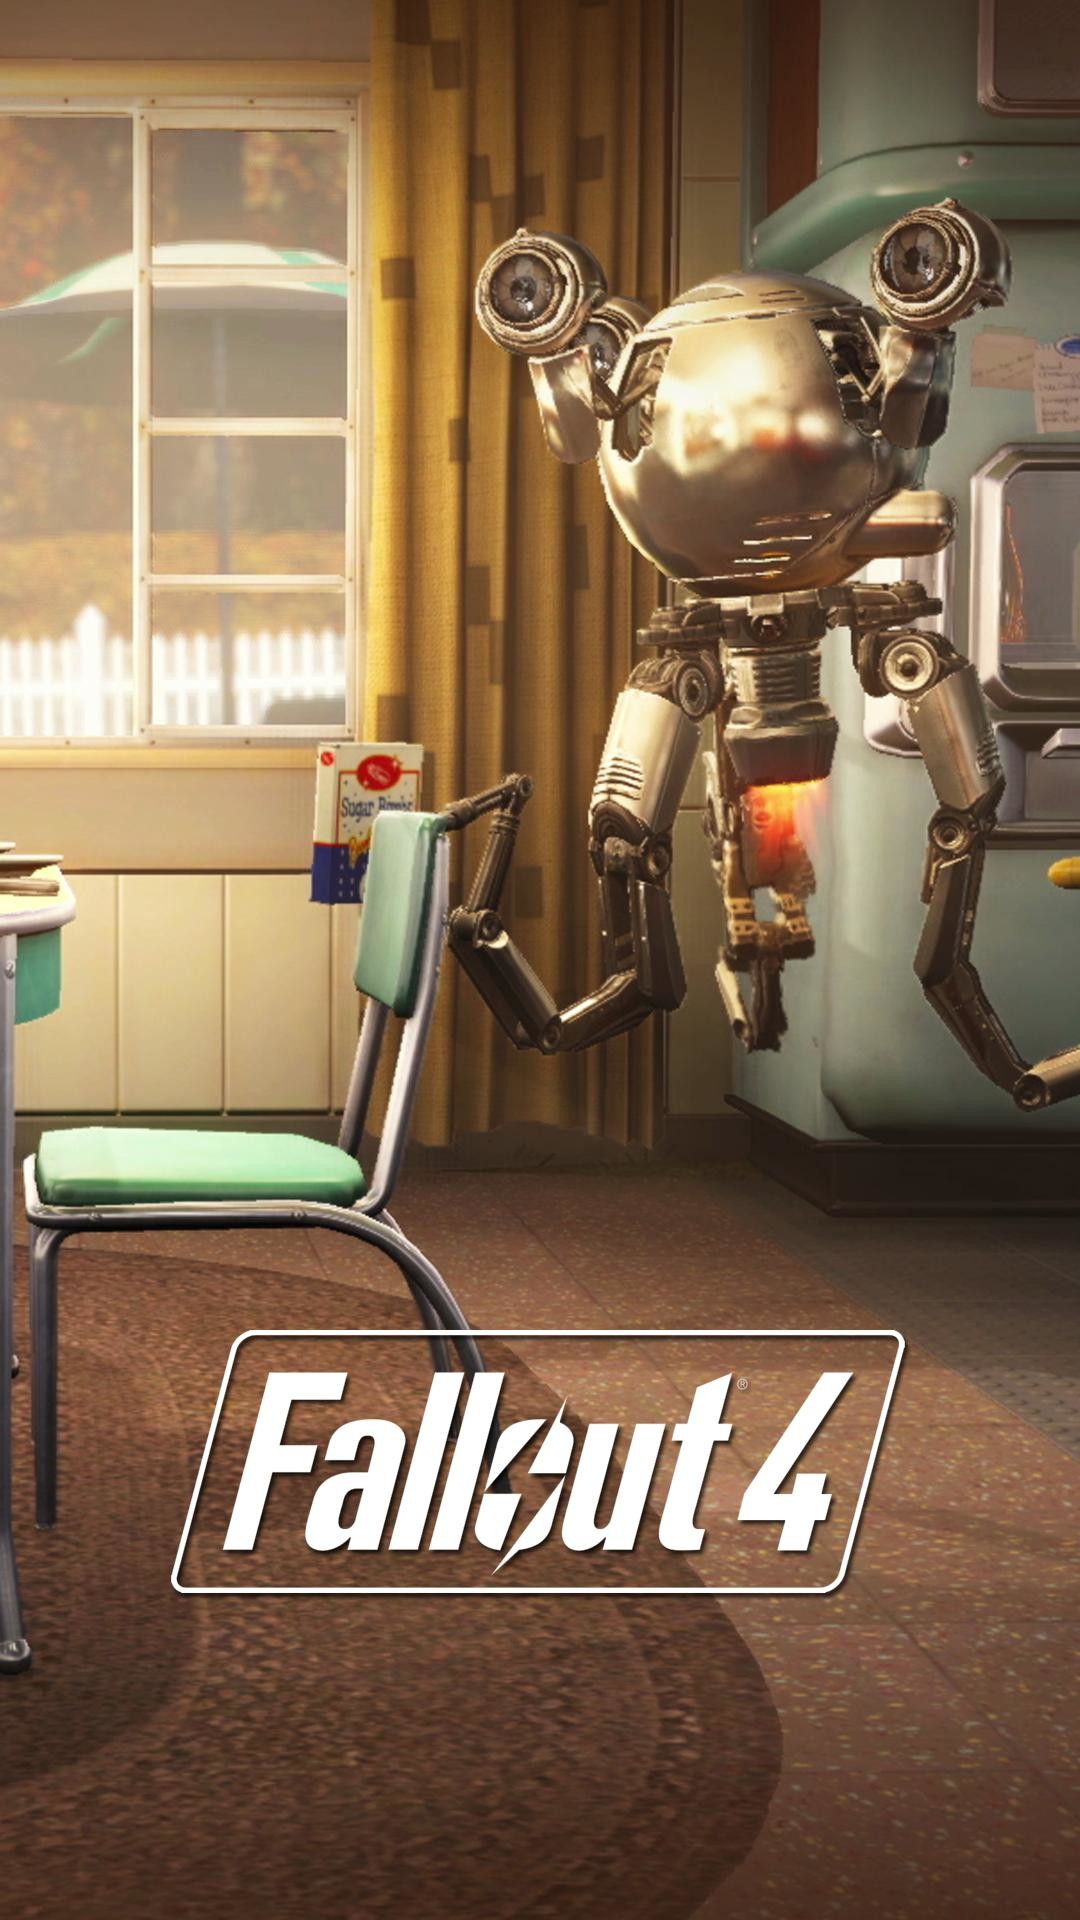 1080x1920 0  Hd Iphone 6 Wallpapers Fallout  I made some Fallout 4  lock screen wallpapers from E3 stills